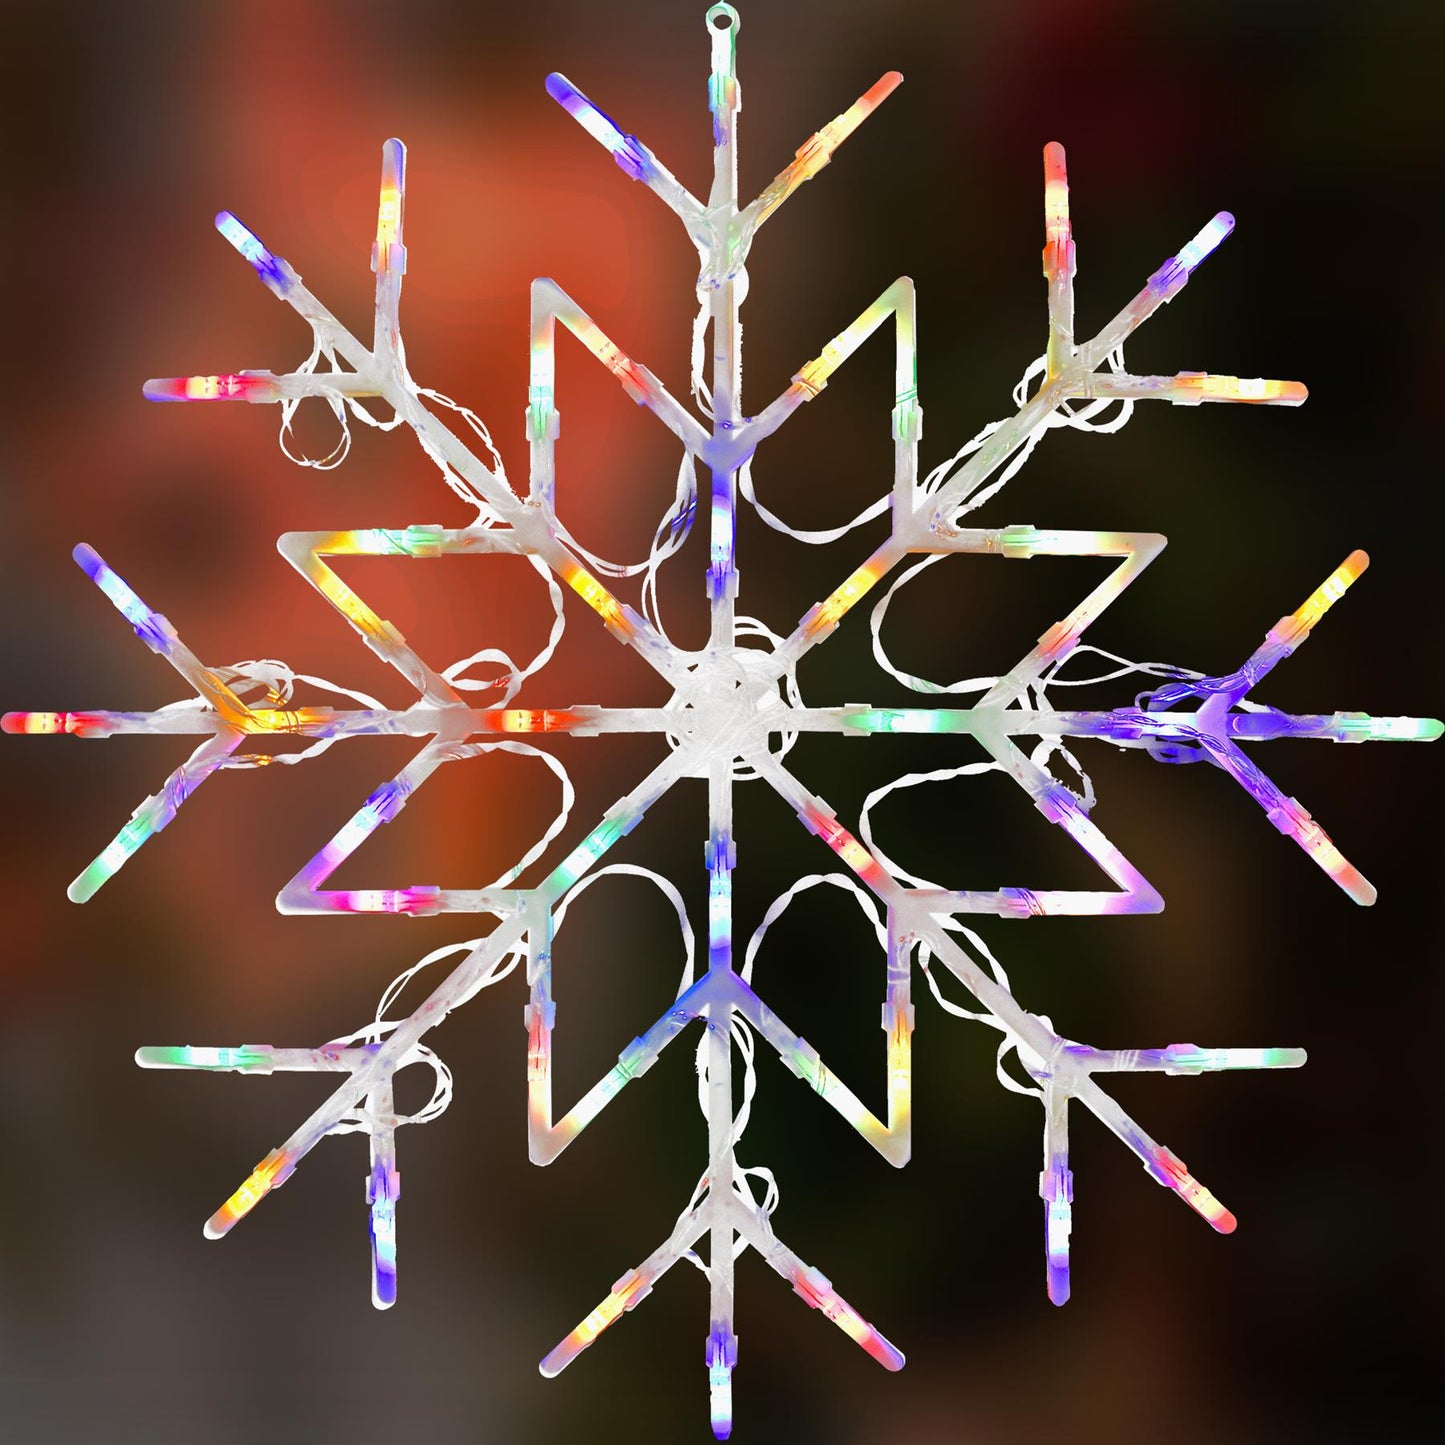 Twinkle Up Your Christmas Decor with 50 LED Snowflakes